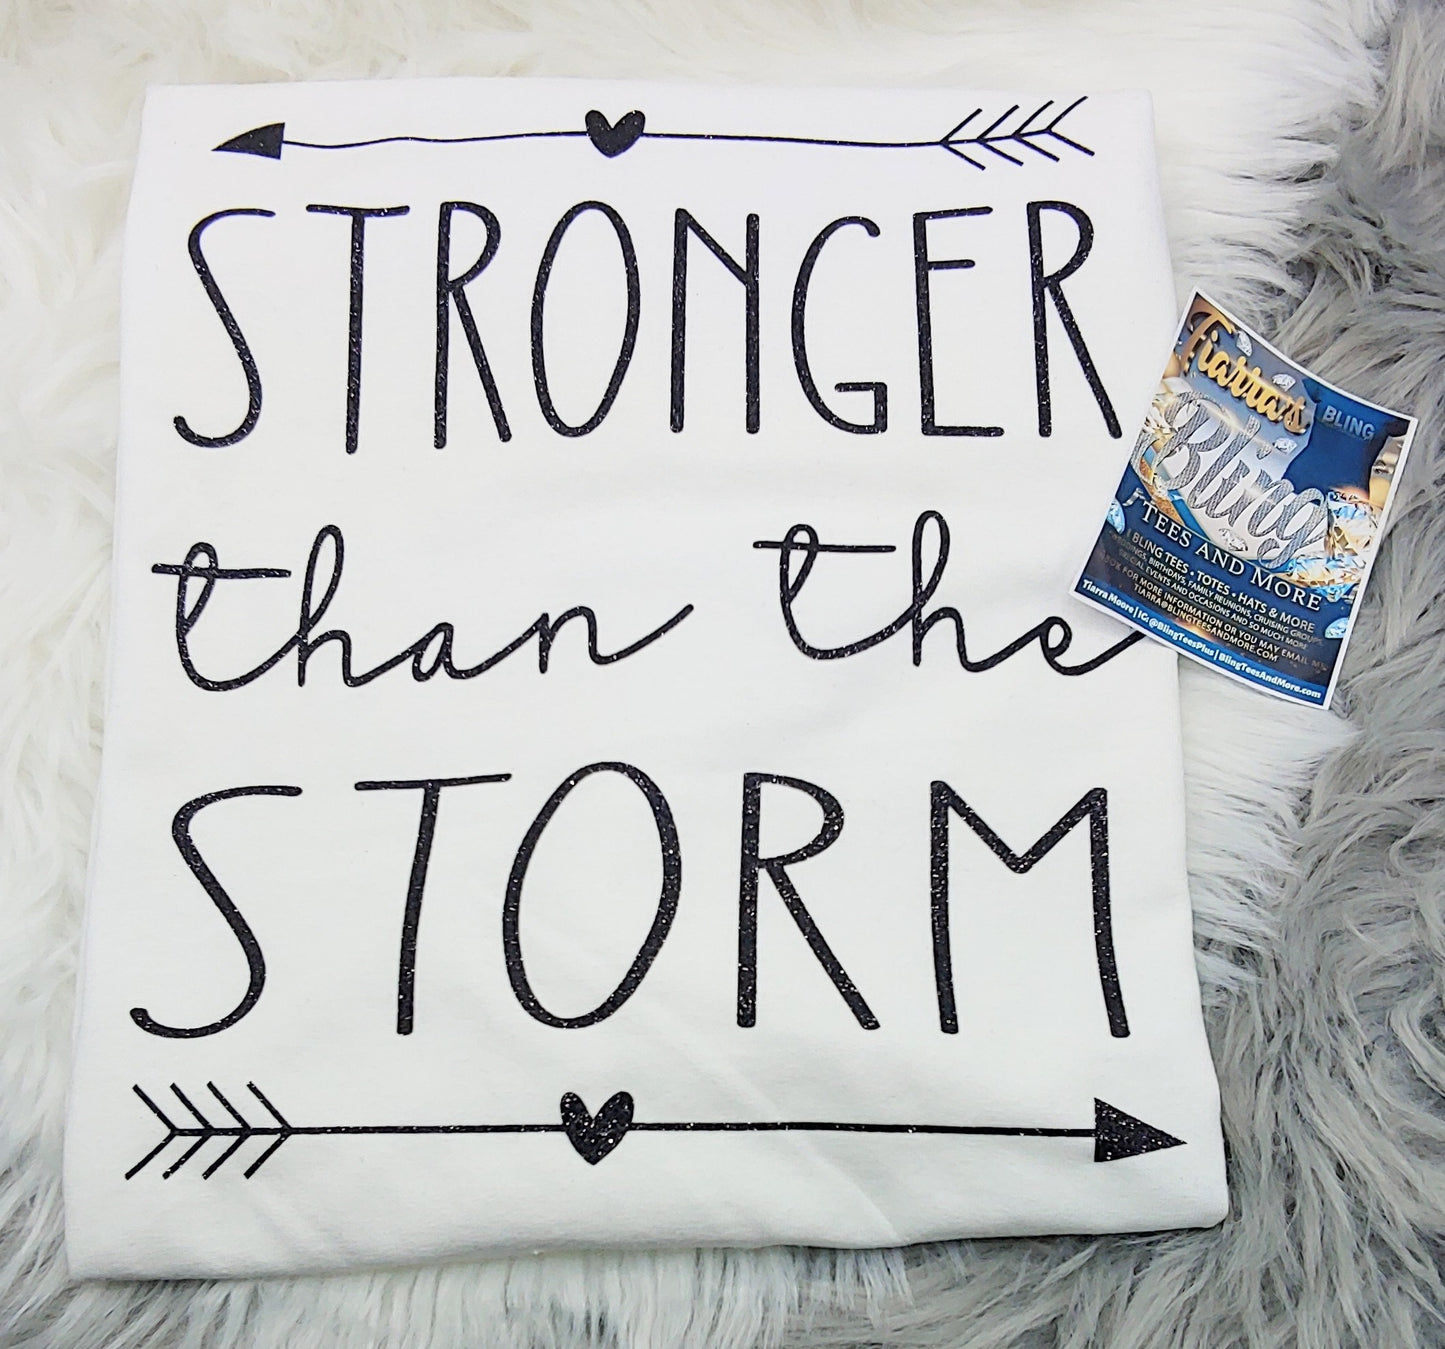 Stronger Than the Storm T-Shirt